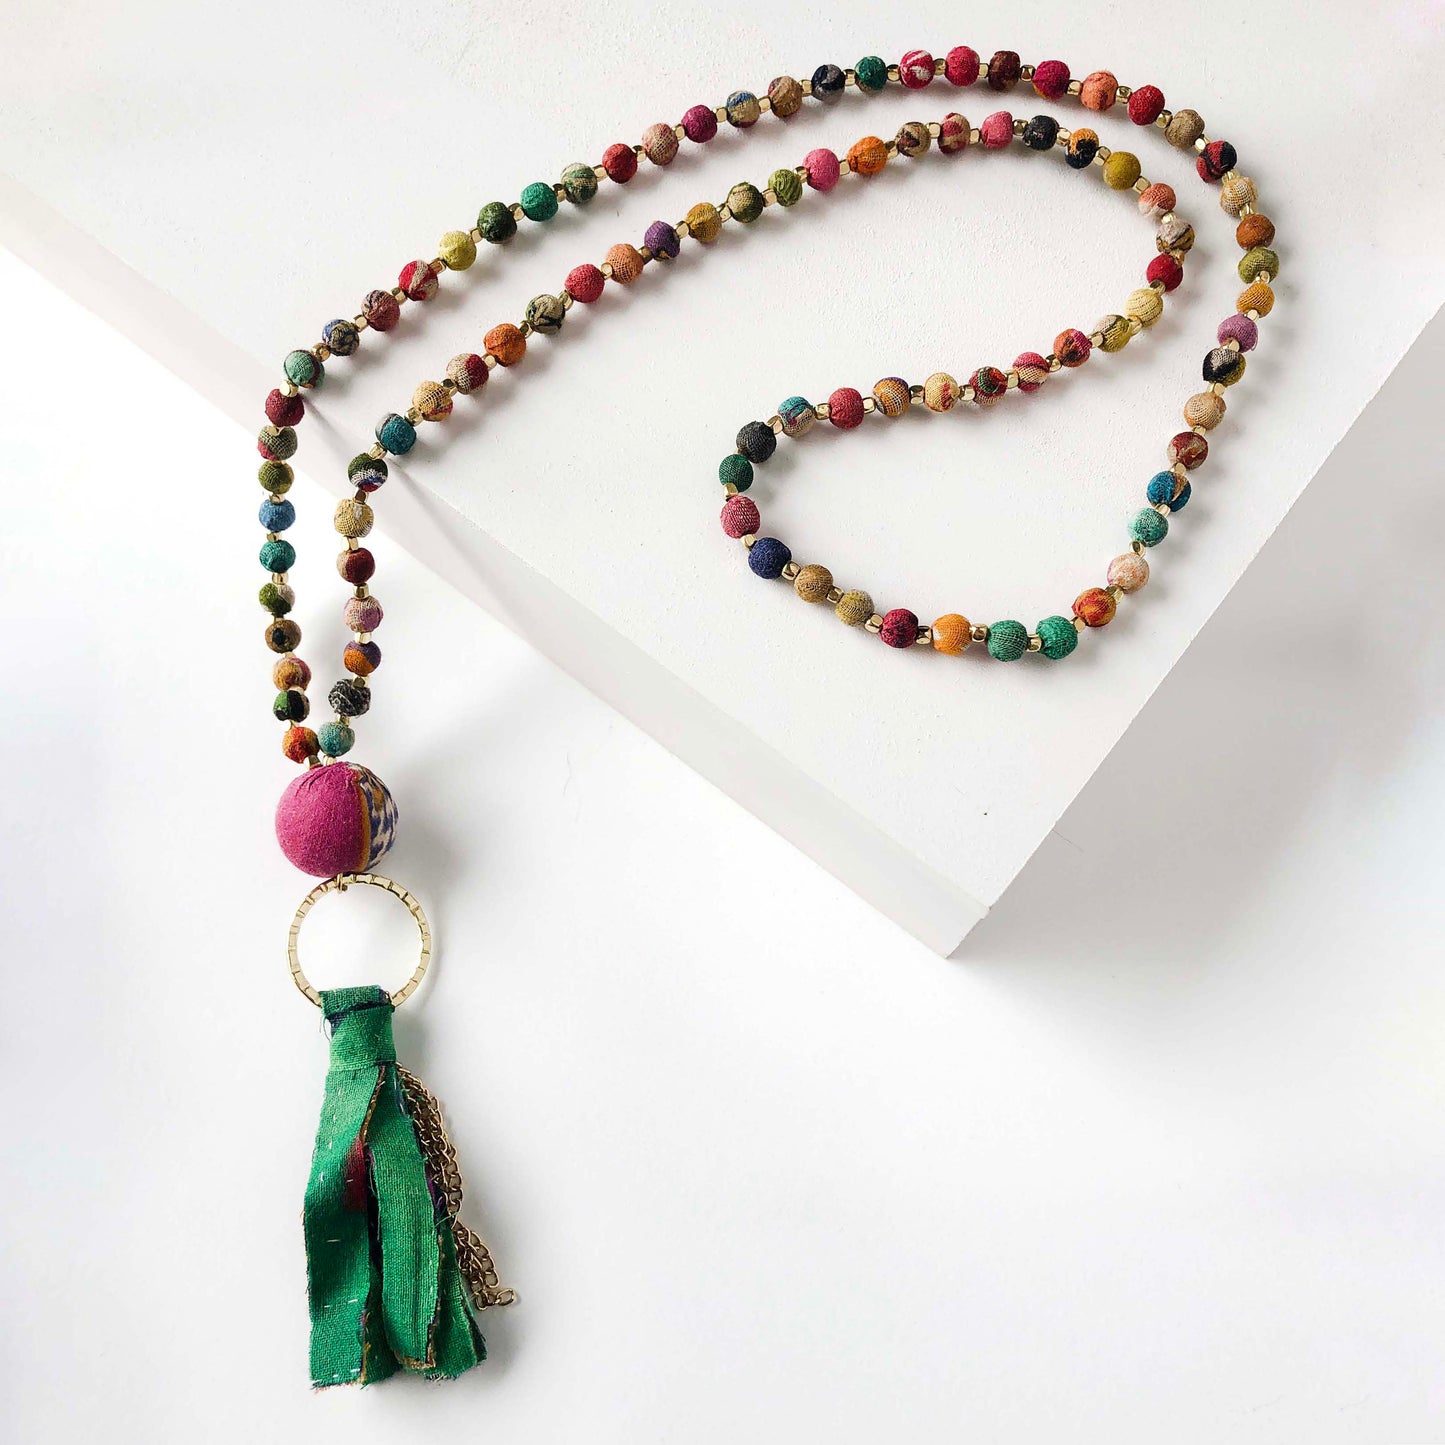 Load image into Gallery viewer, A strand of colorful textile-covered beads is punctuated with a statement bead and a colorful metallic-accented tassel.
